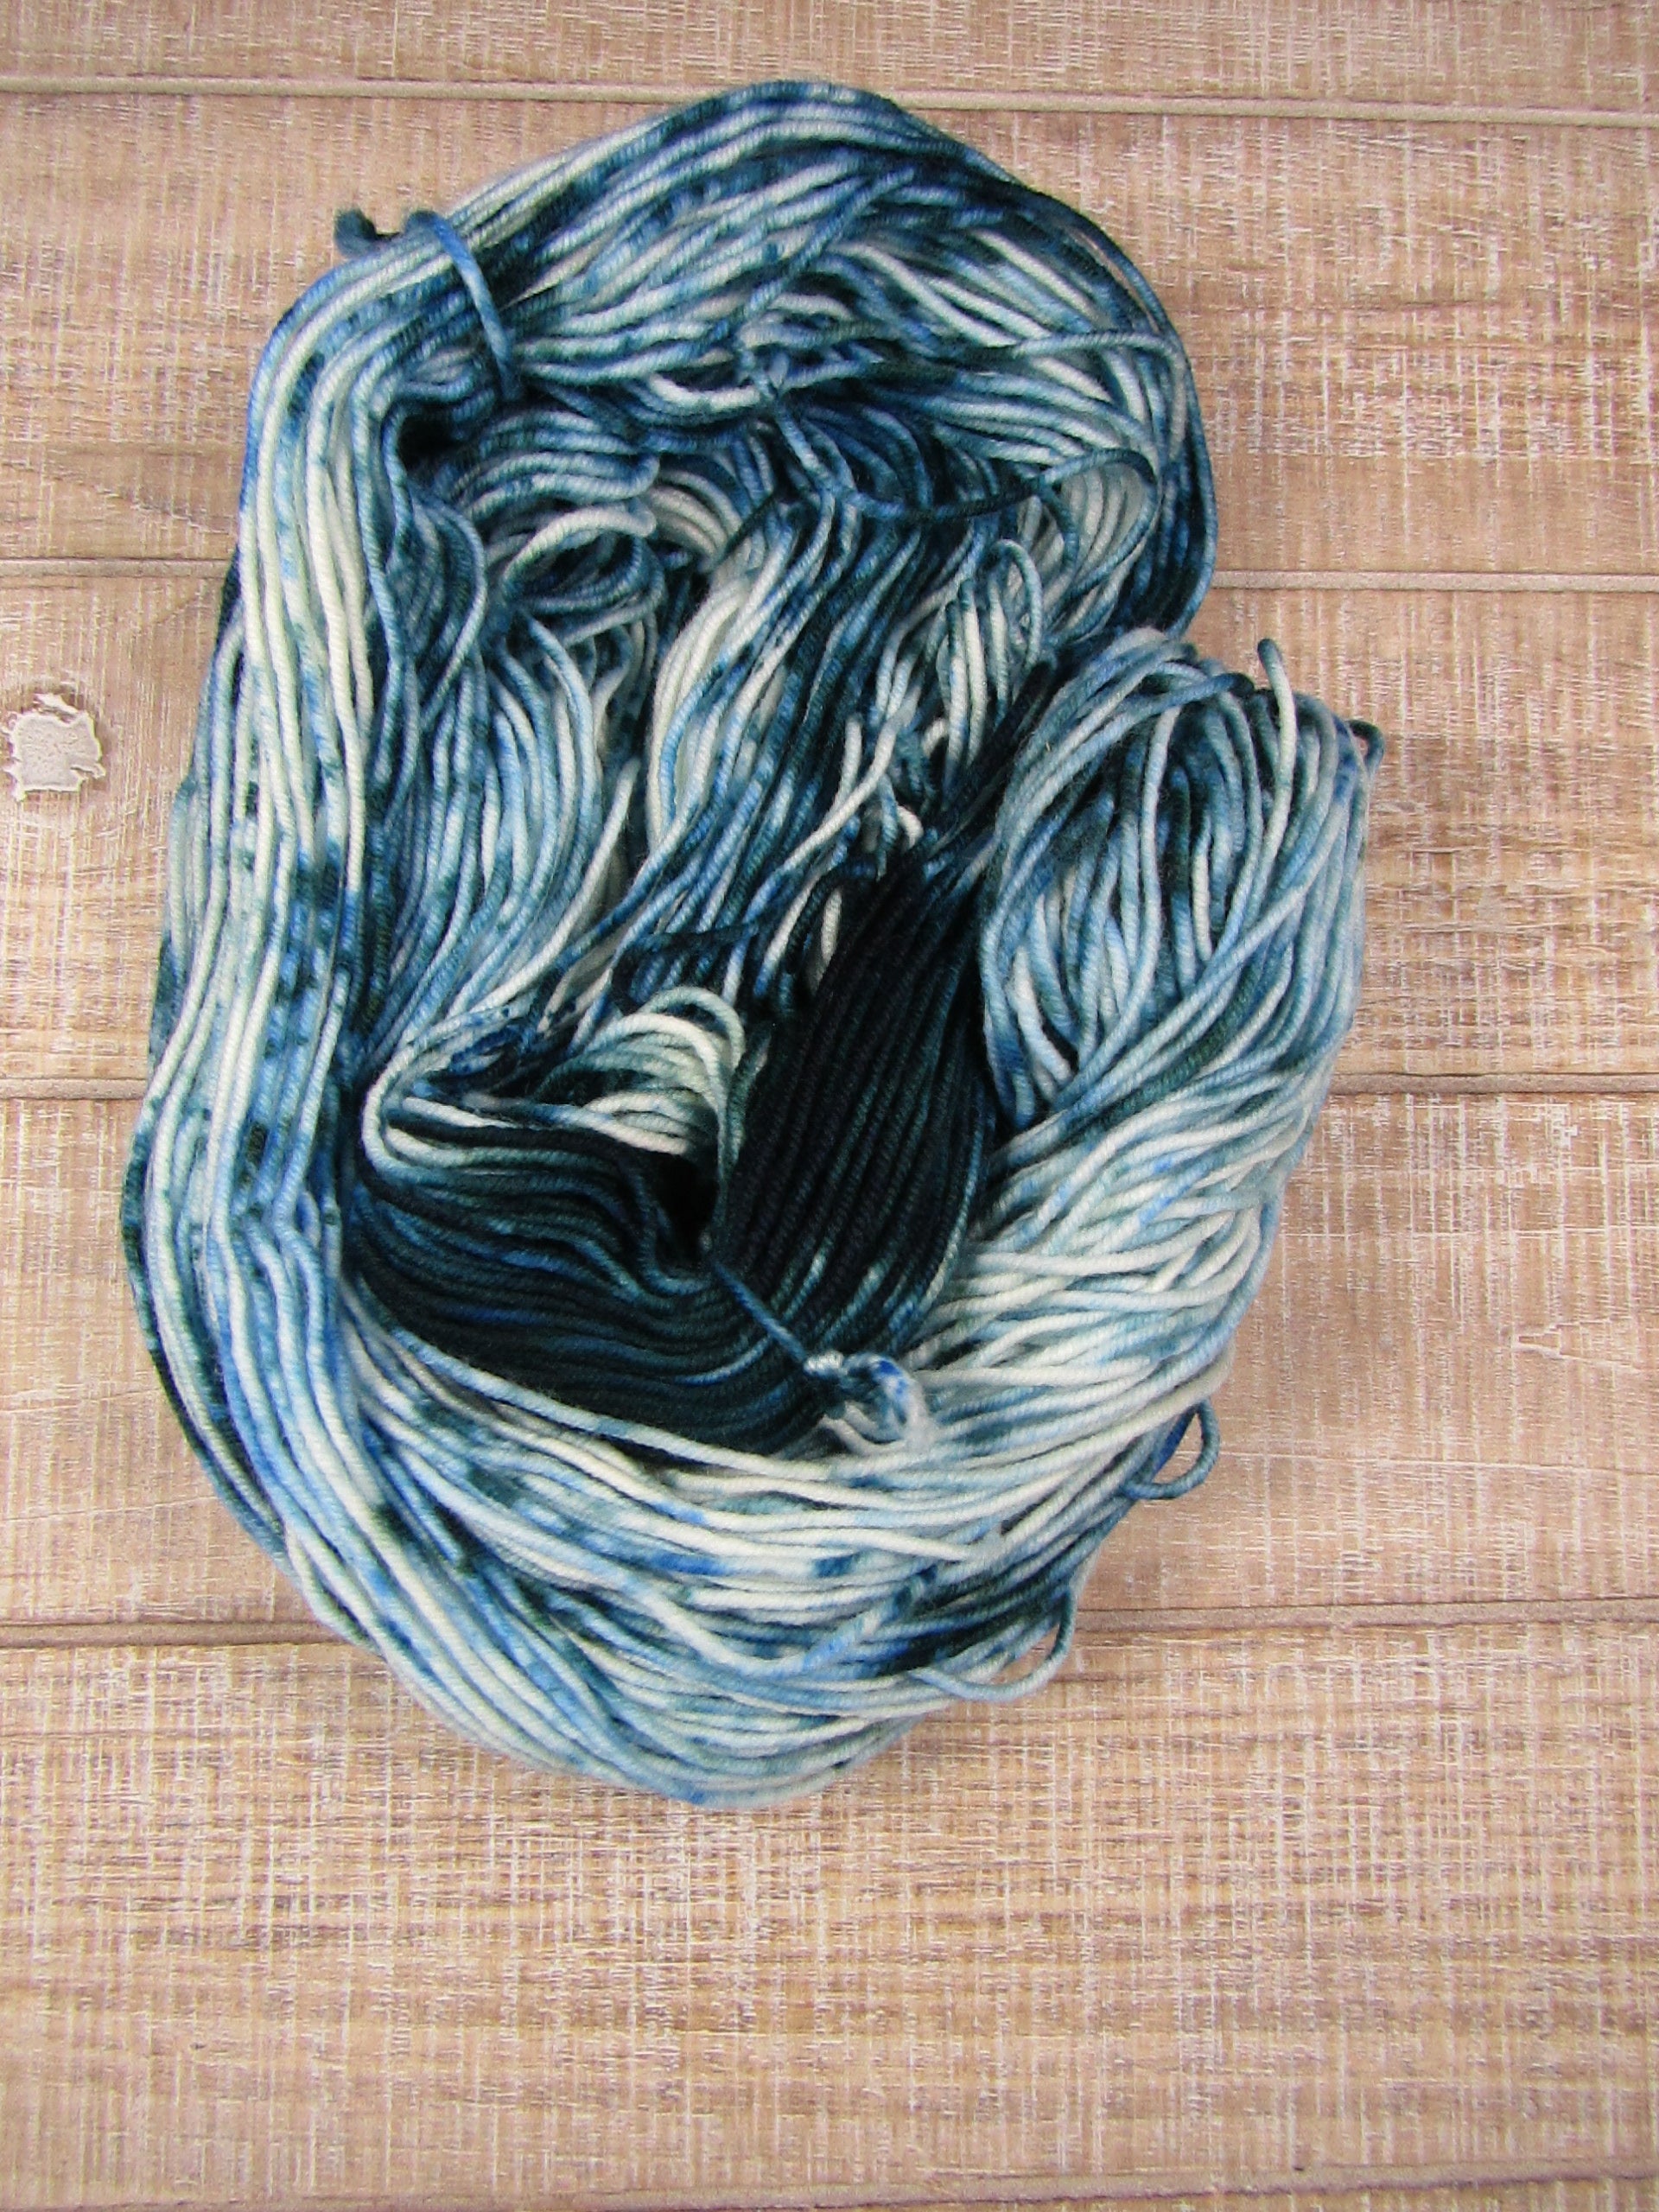 Hand-dyed yarn with an area of blue/green and blue/green speckles worsted weight 